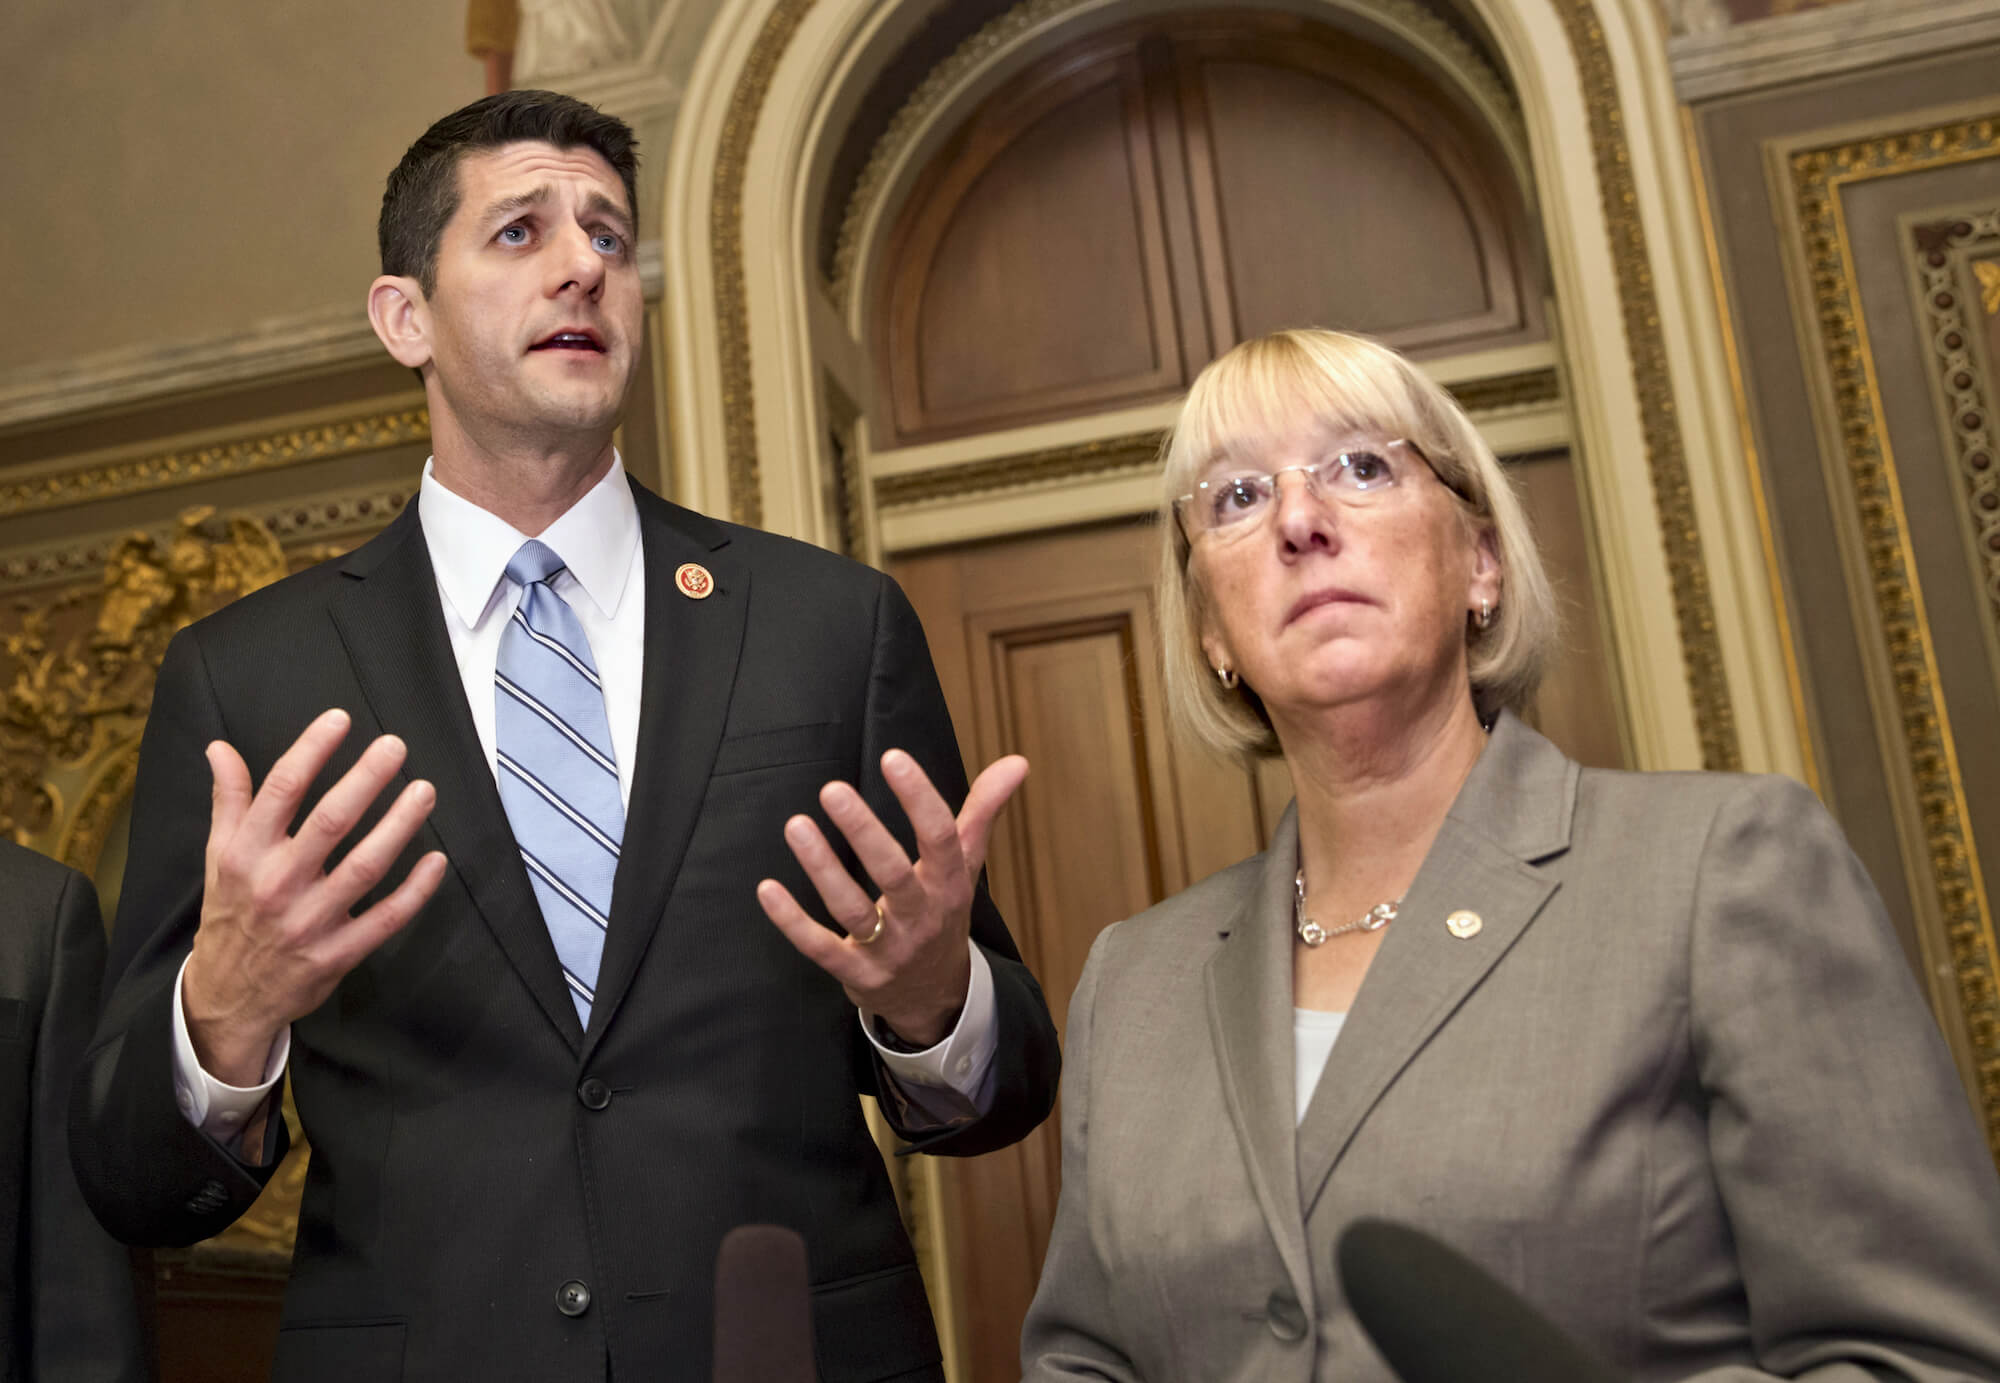 The Commission on Evidence-Based Policymaking was formed in response to a bill sponsored by Speaker of the House Paul Ryan and Senator Patty Murray (AP Photo/ Scott Applewhite, File)